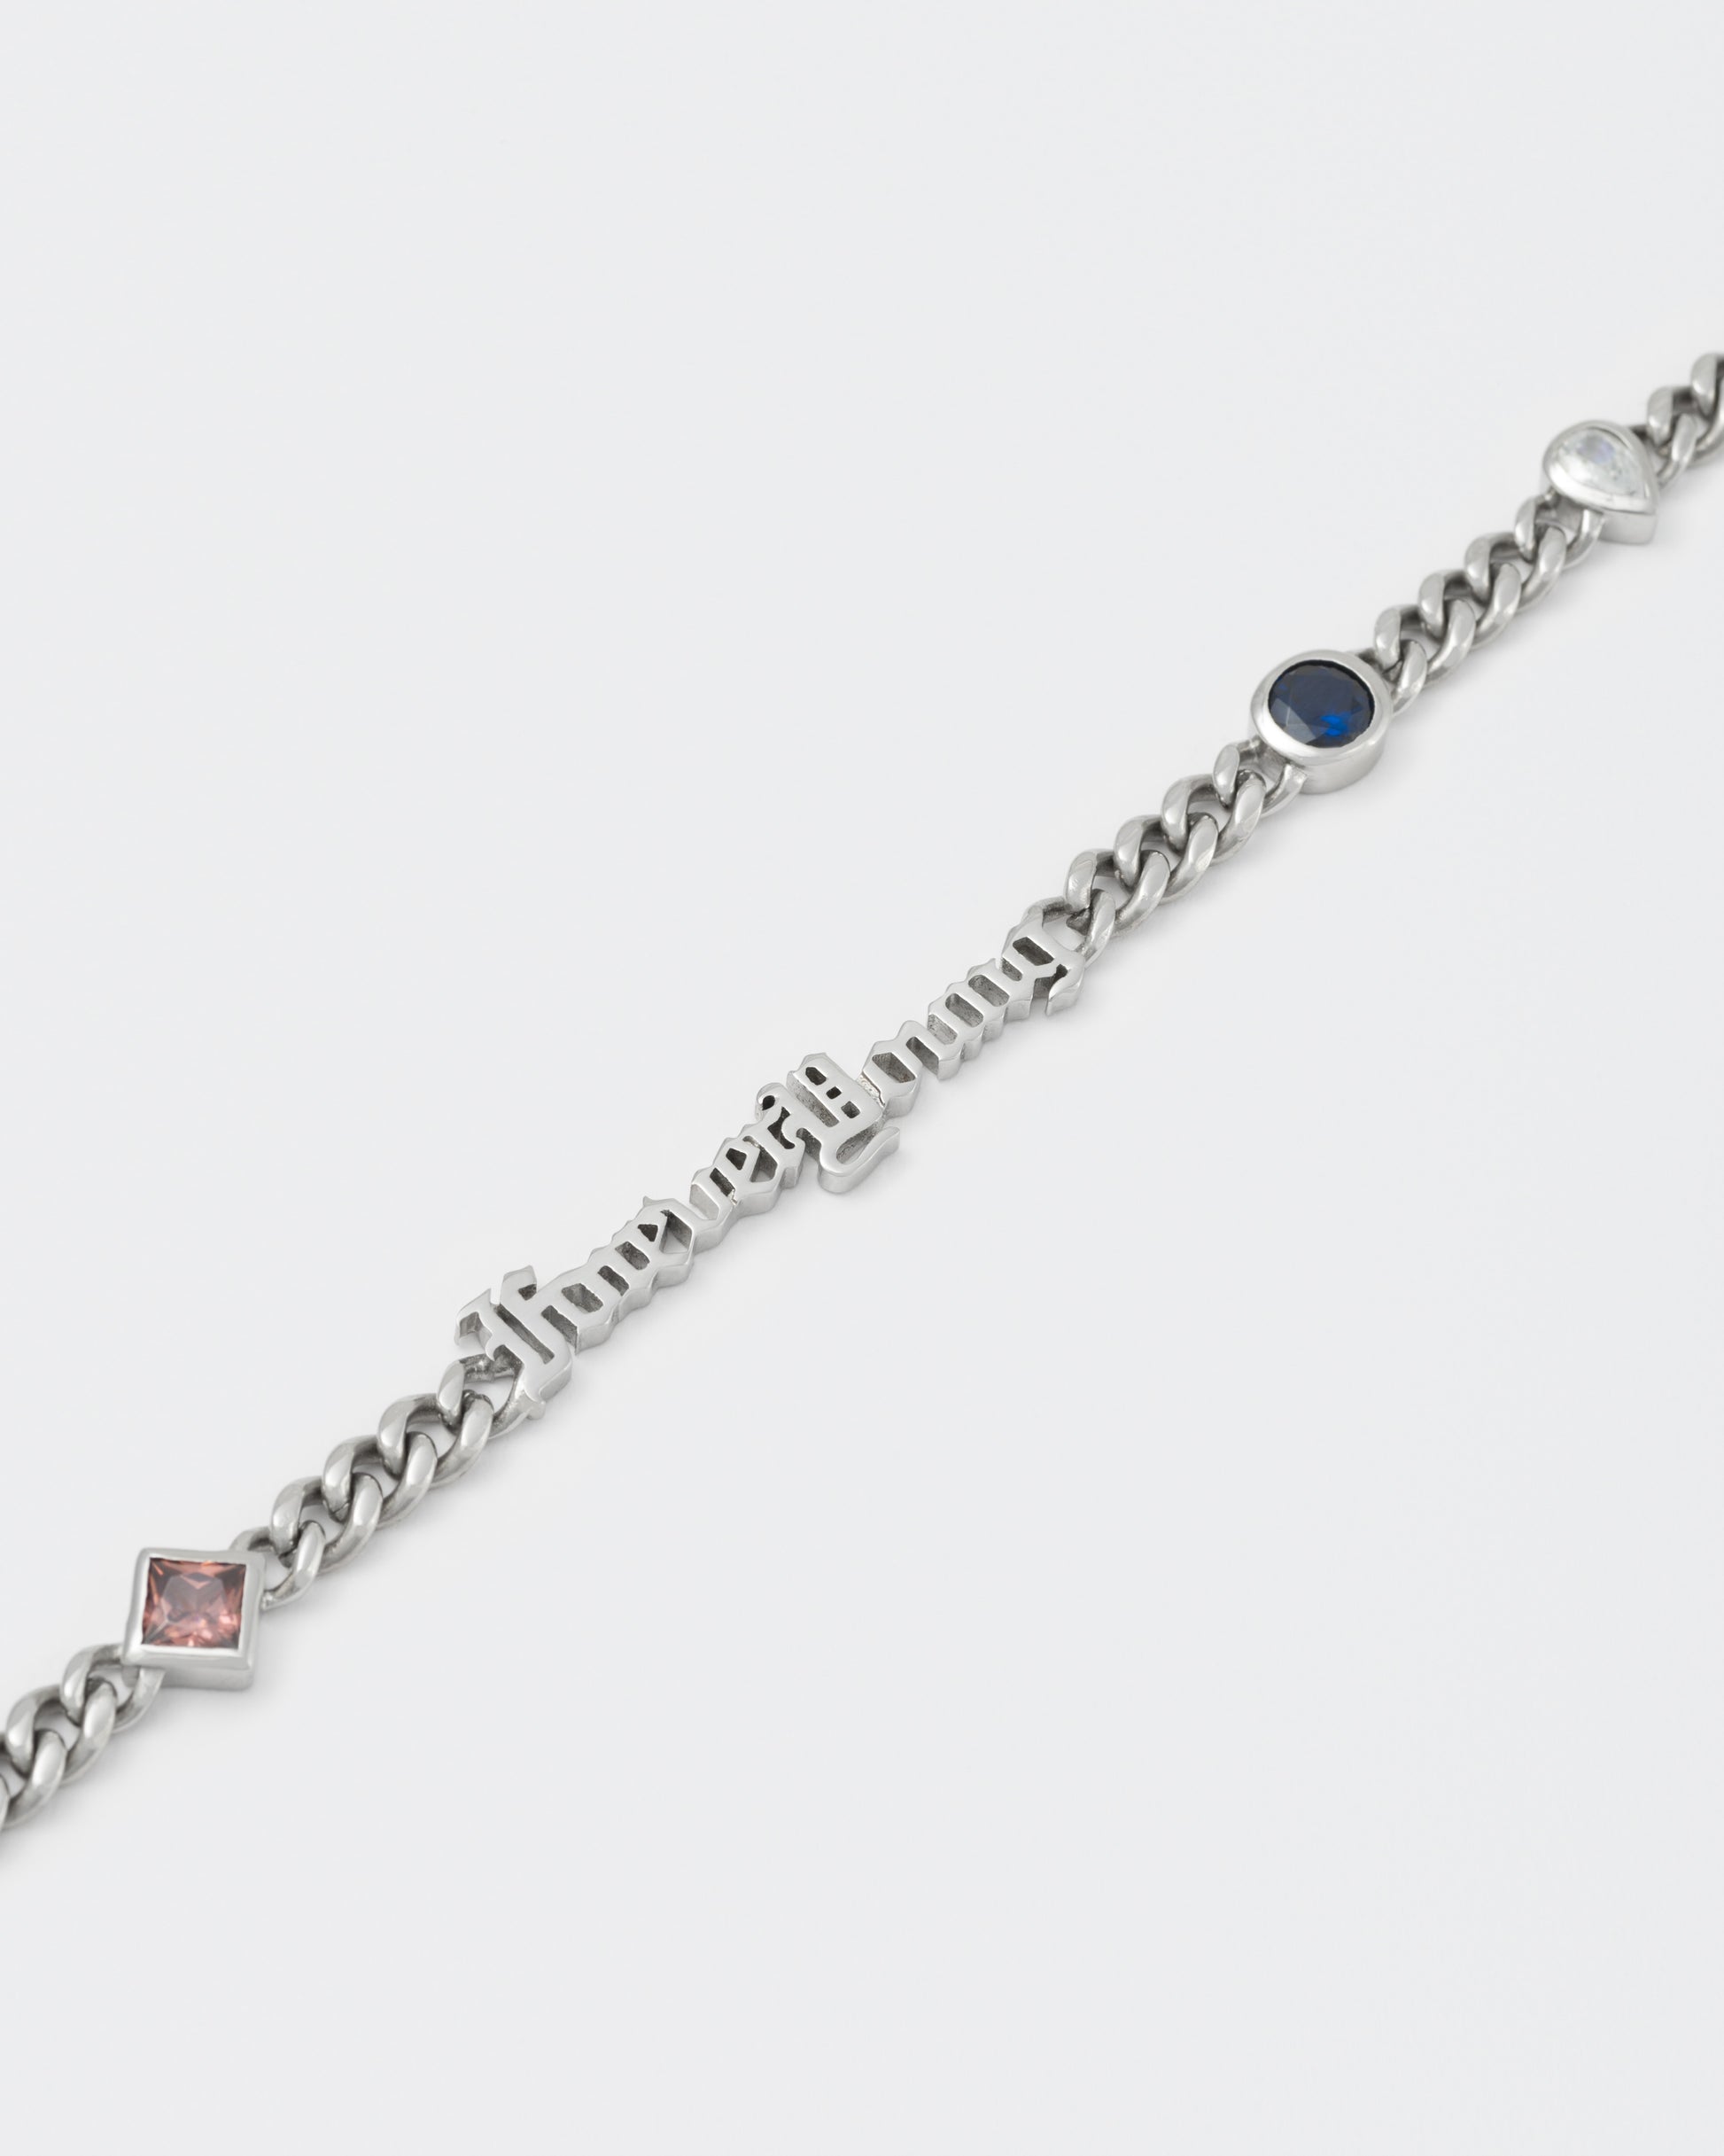 detail of Forever young cuban chain necklace with 18kt white gold coating, mixed shape bezel stones in diamond white, burna blue, green, chocolate and "Forever Young" central metal tag